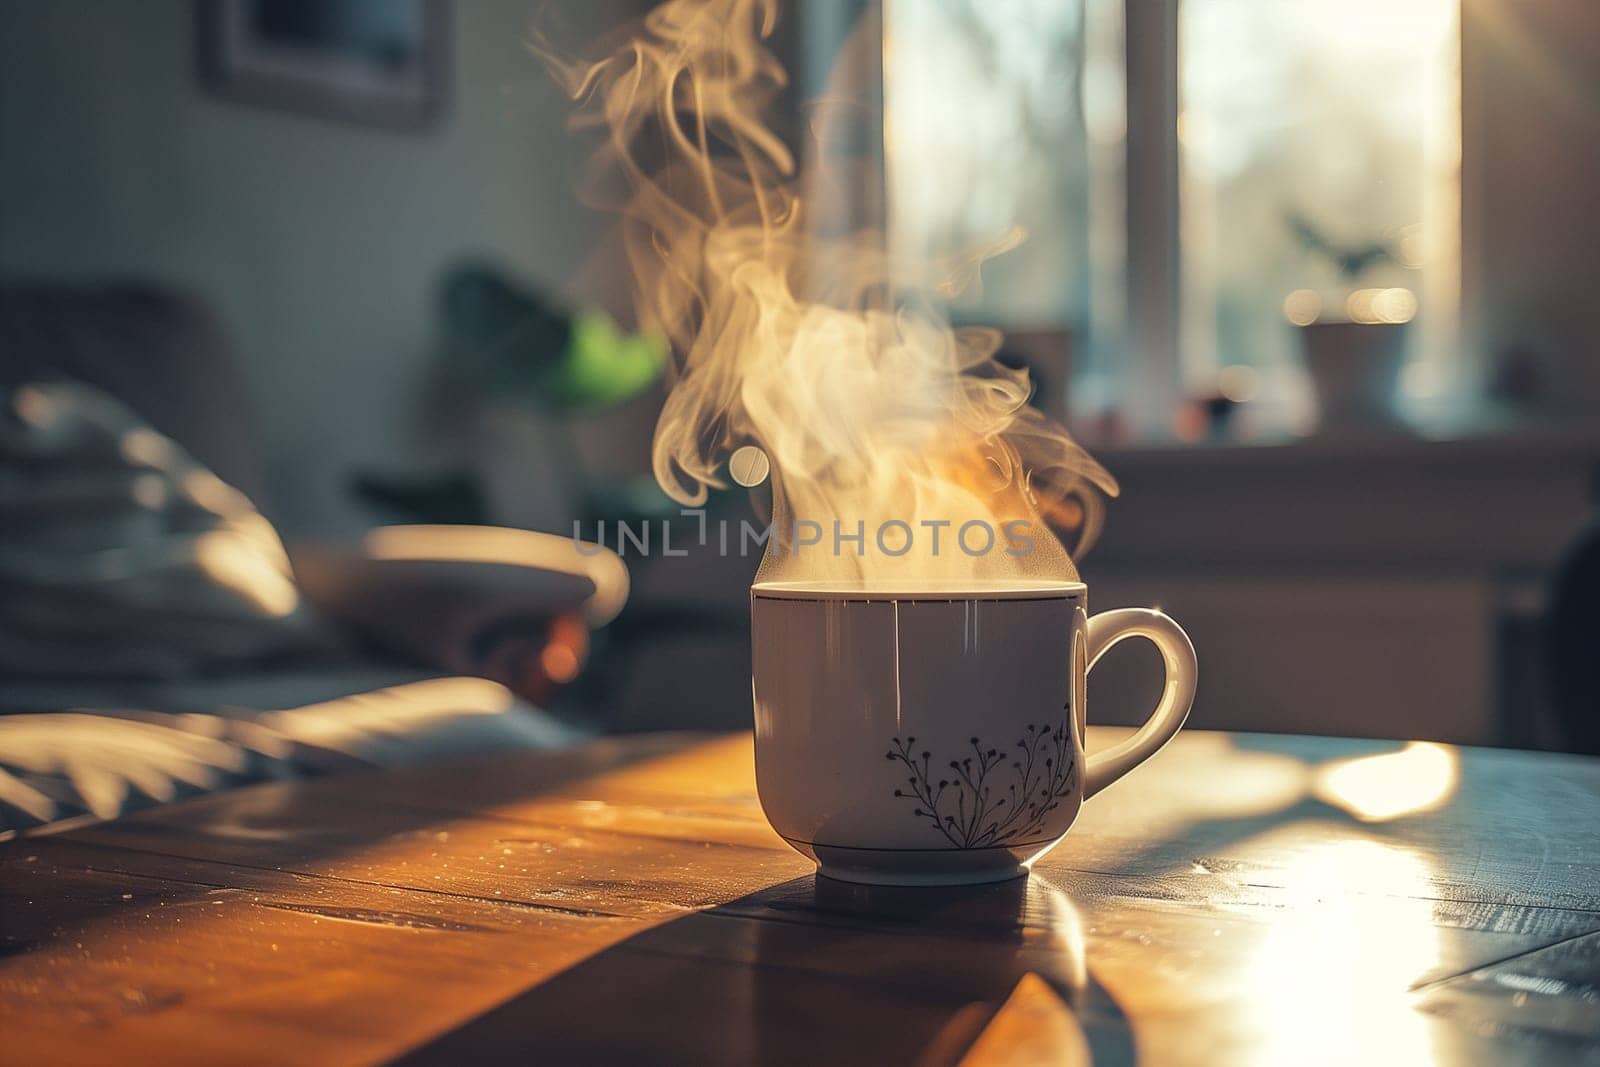 A close-up of a steaming cup of coffee on a wooden table in a sunlit room.